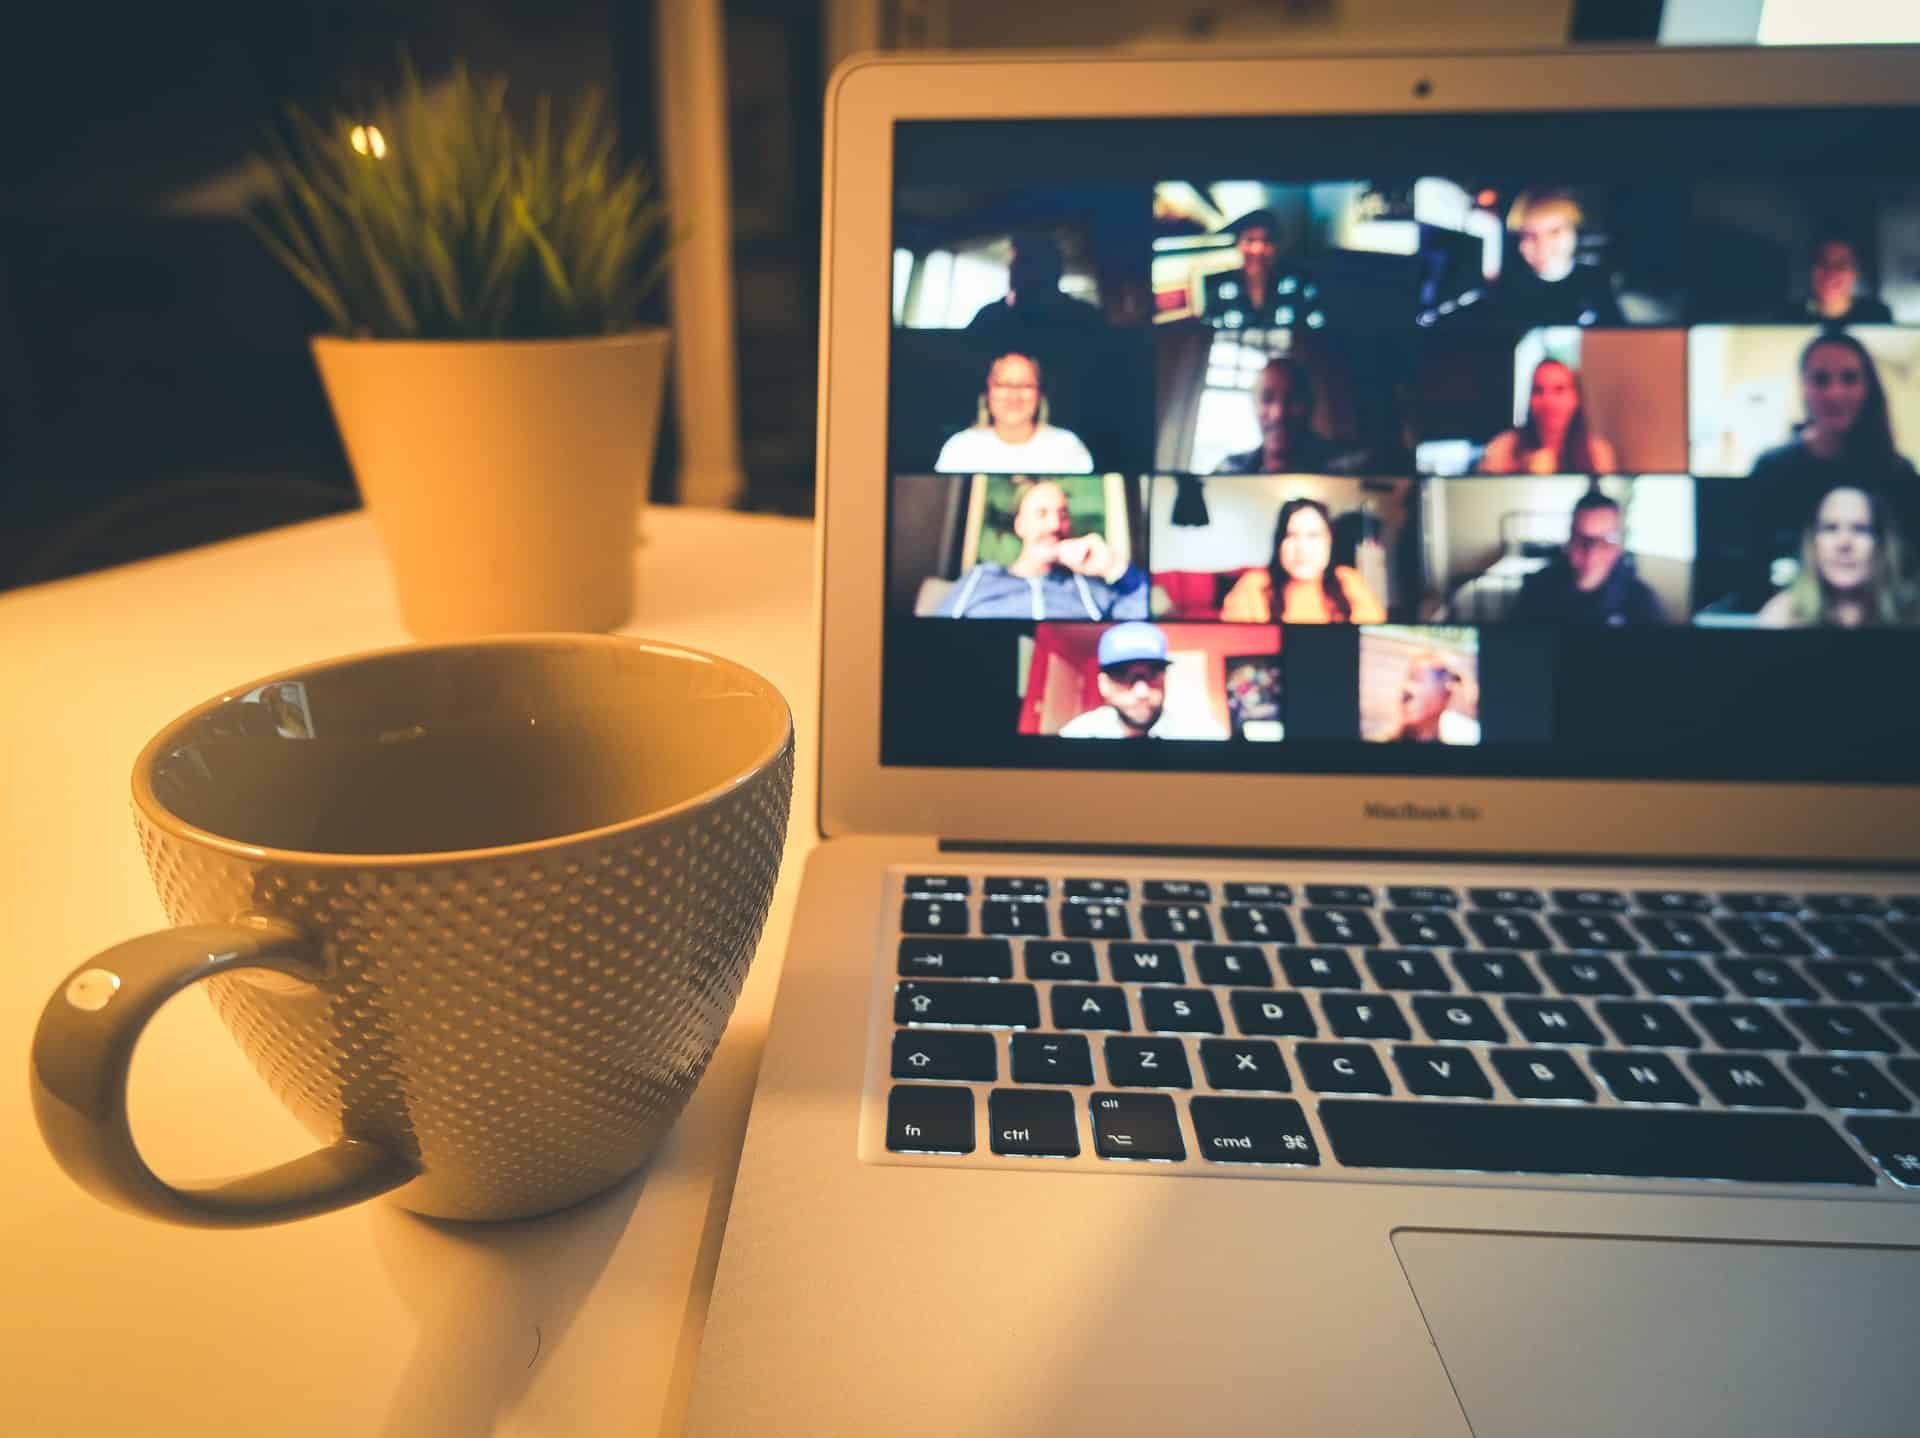 A Zoom meeting and coffee - the perfect opportunity to do virtual team building activities with your team.